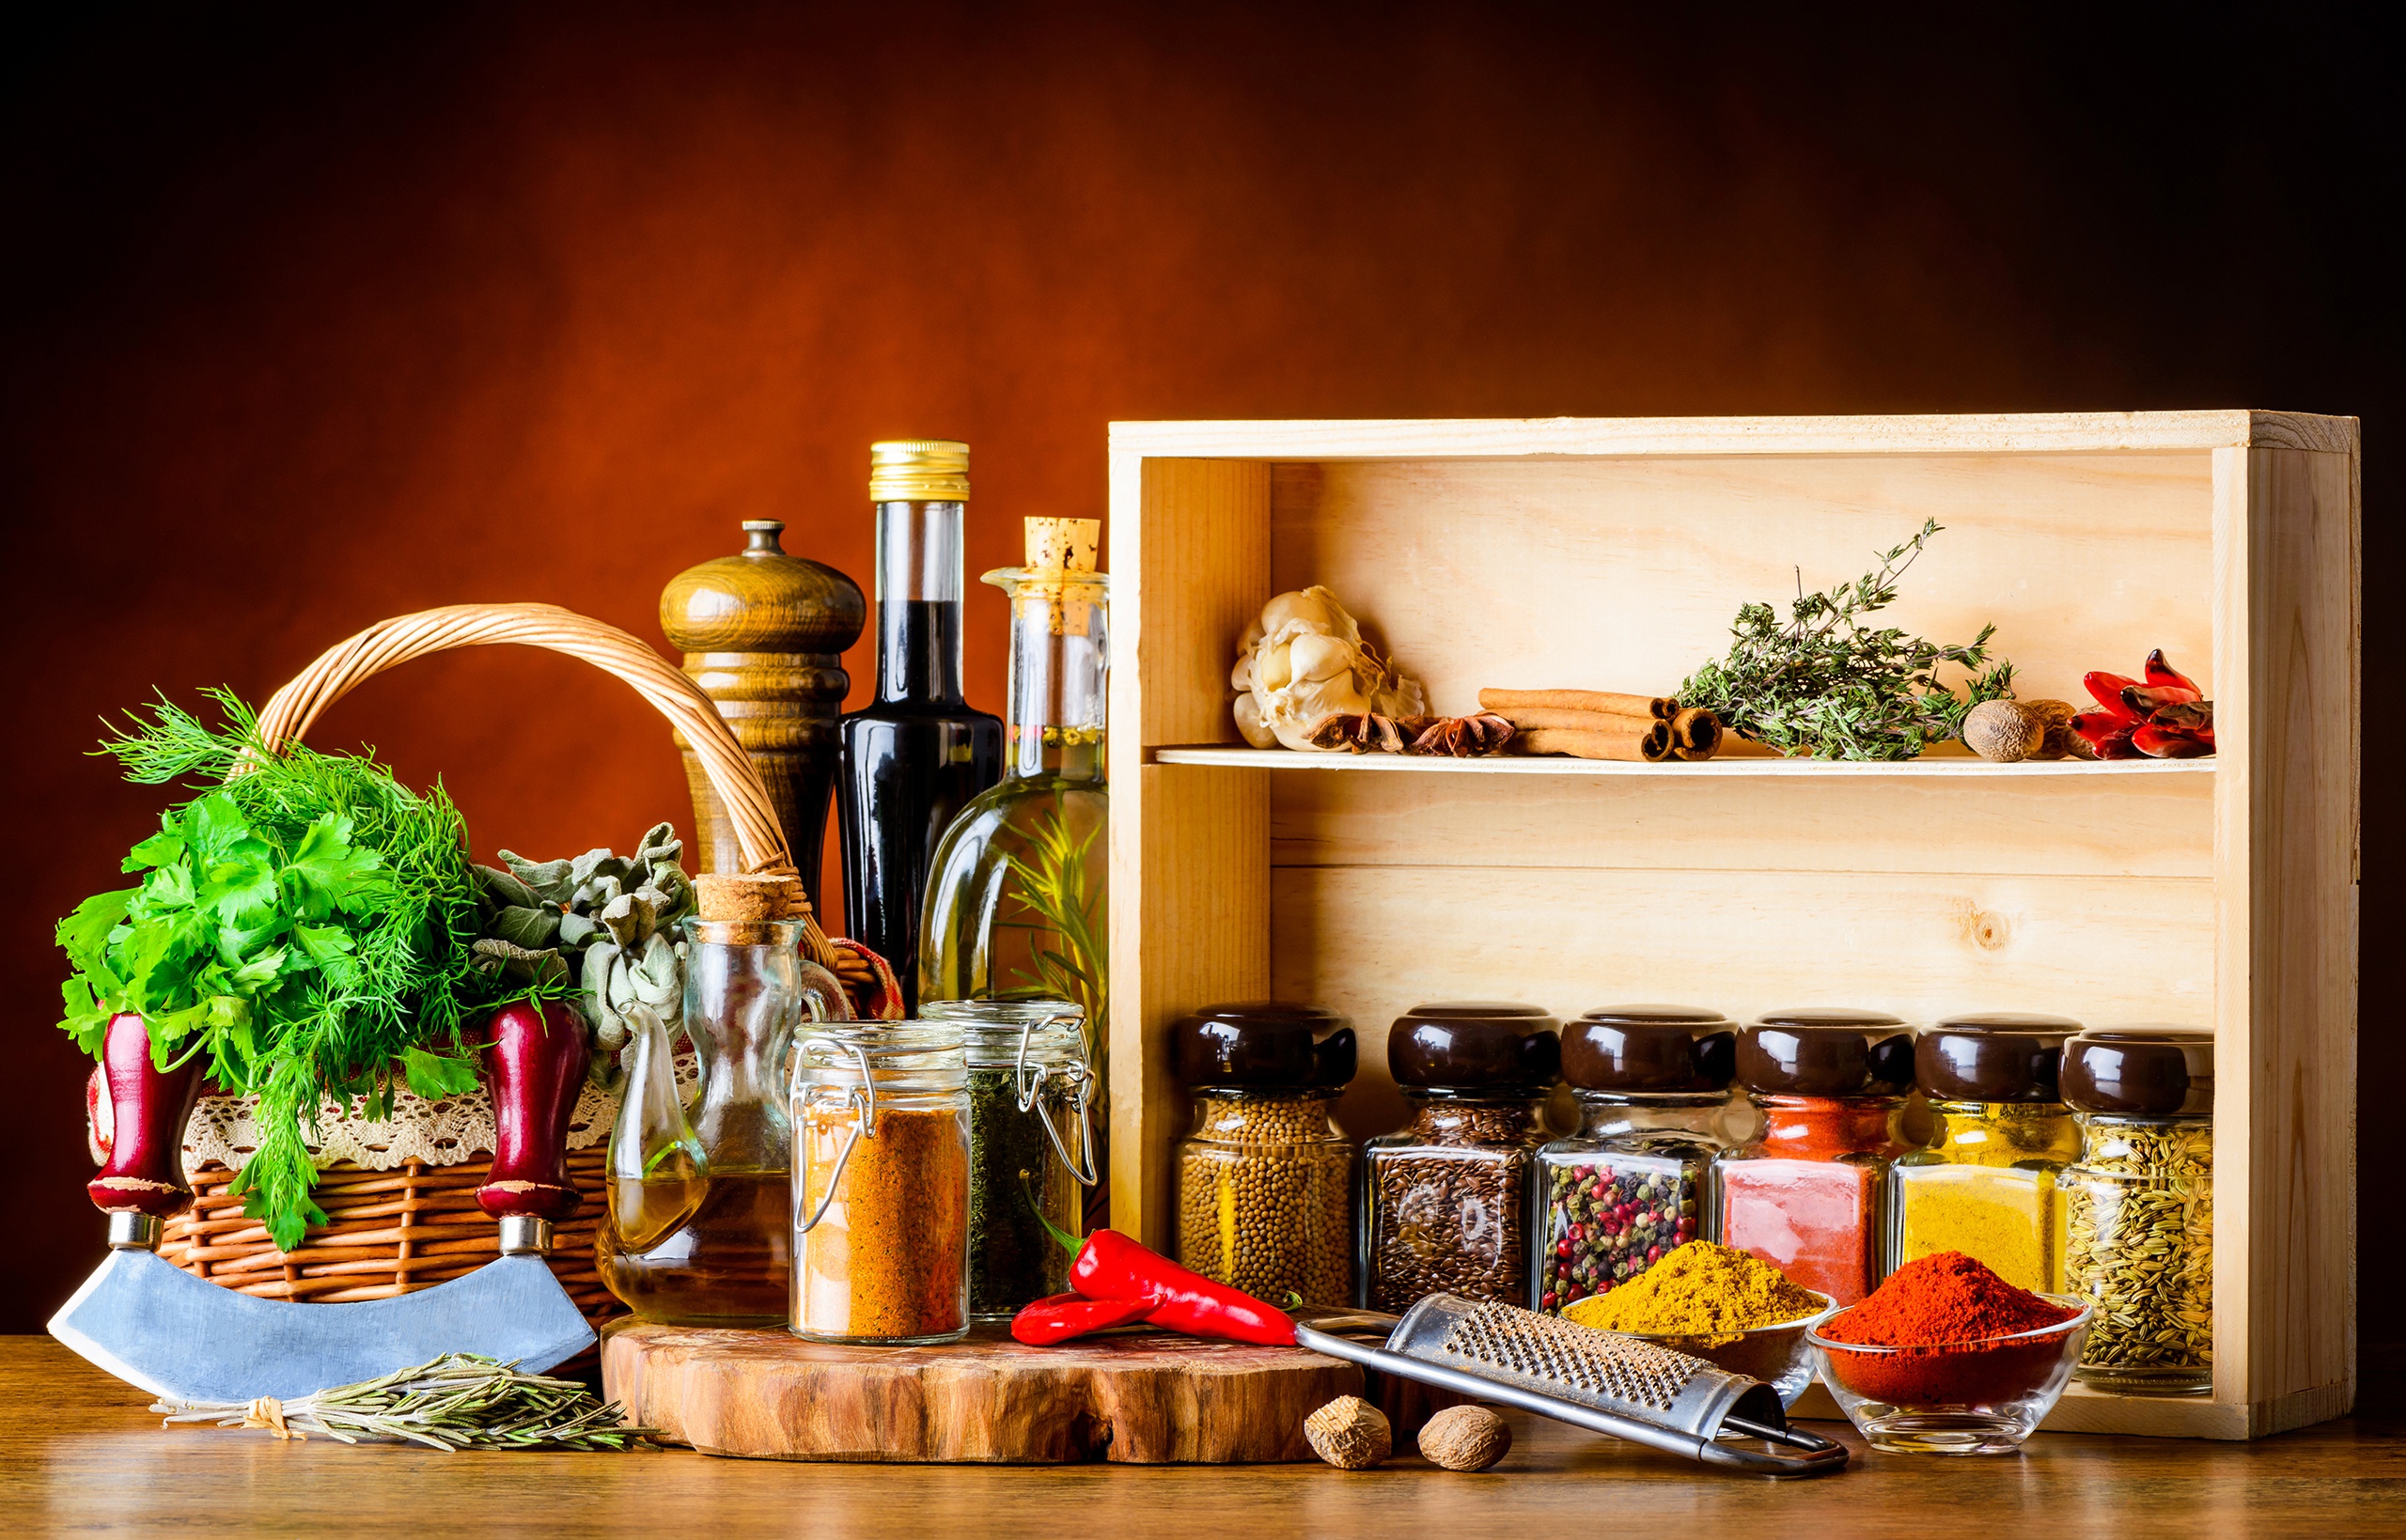 spices, food, herbs and spices, herbs, still life